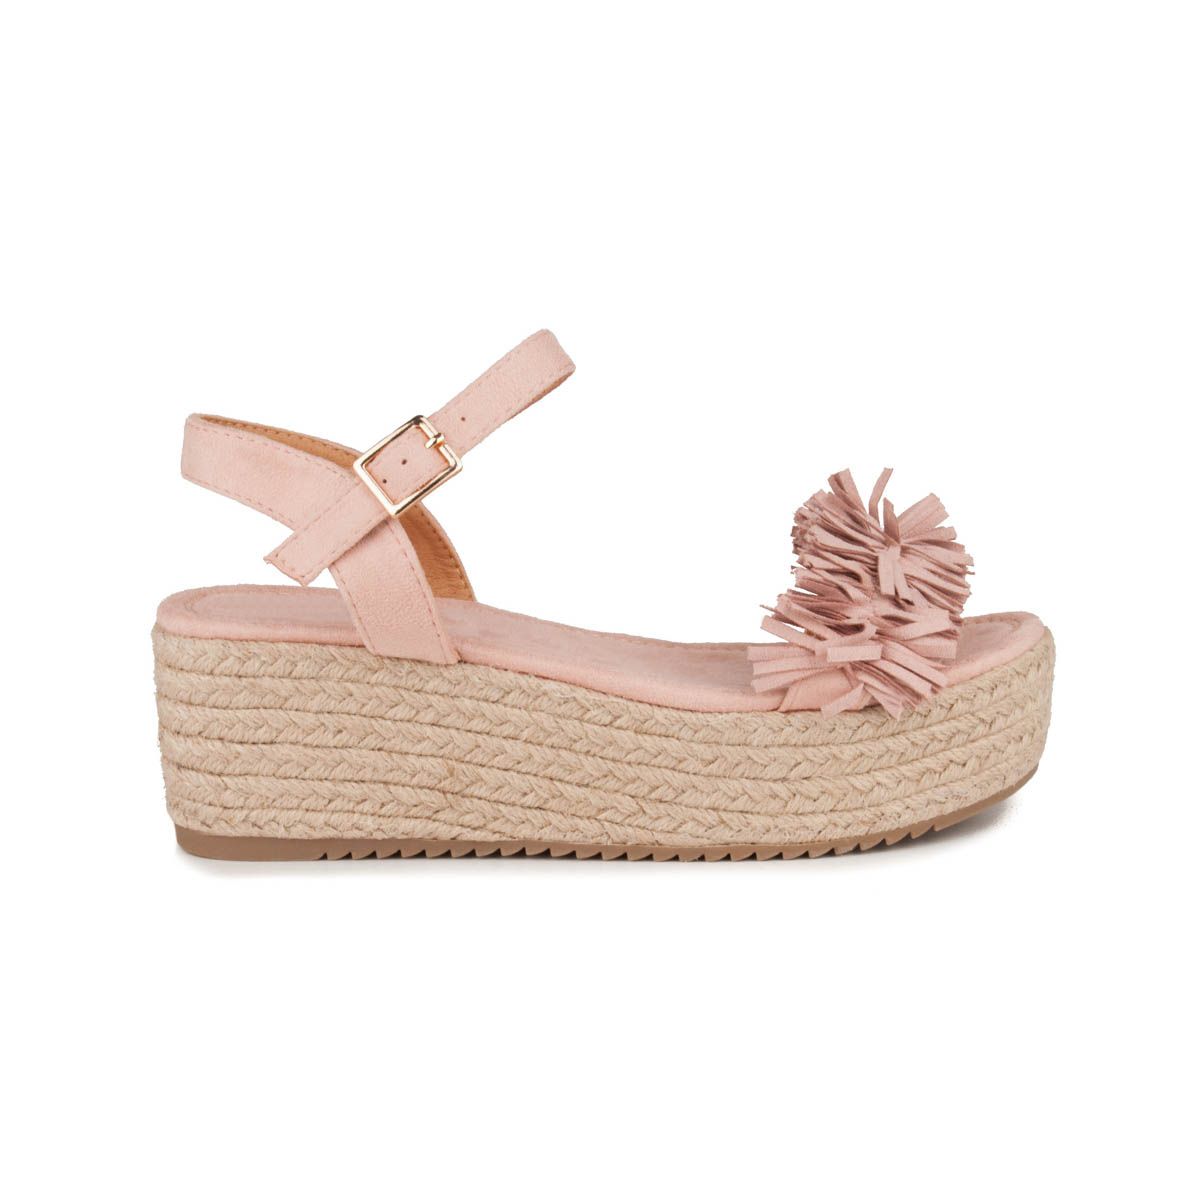 The spotal sandals are ideal for summer and more now that they are fashionable. Spectacular wedge lined with anti-slip rubber patin. Quilted template for convenience. The closure is buckle with elastic to achieve perfect fit. Height Heels 7.5 cm Height Platform 4.5 cm